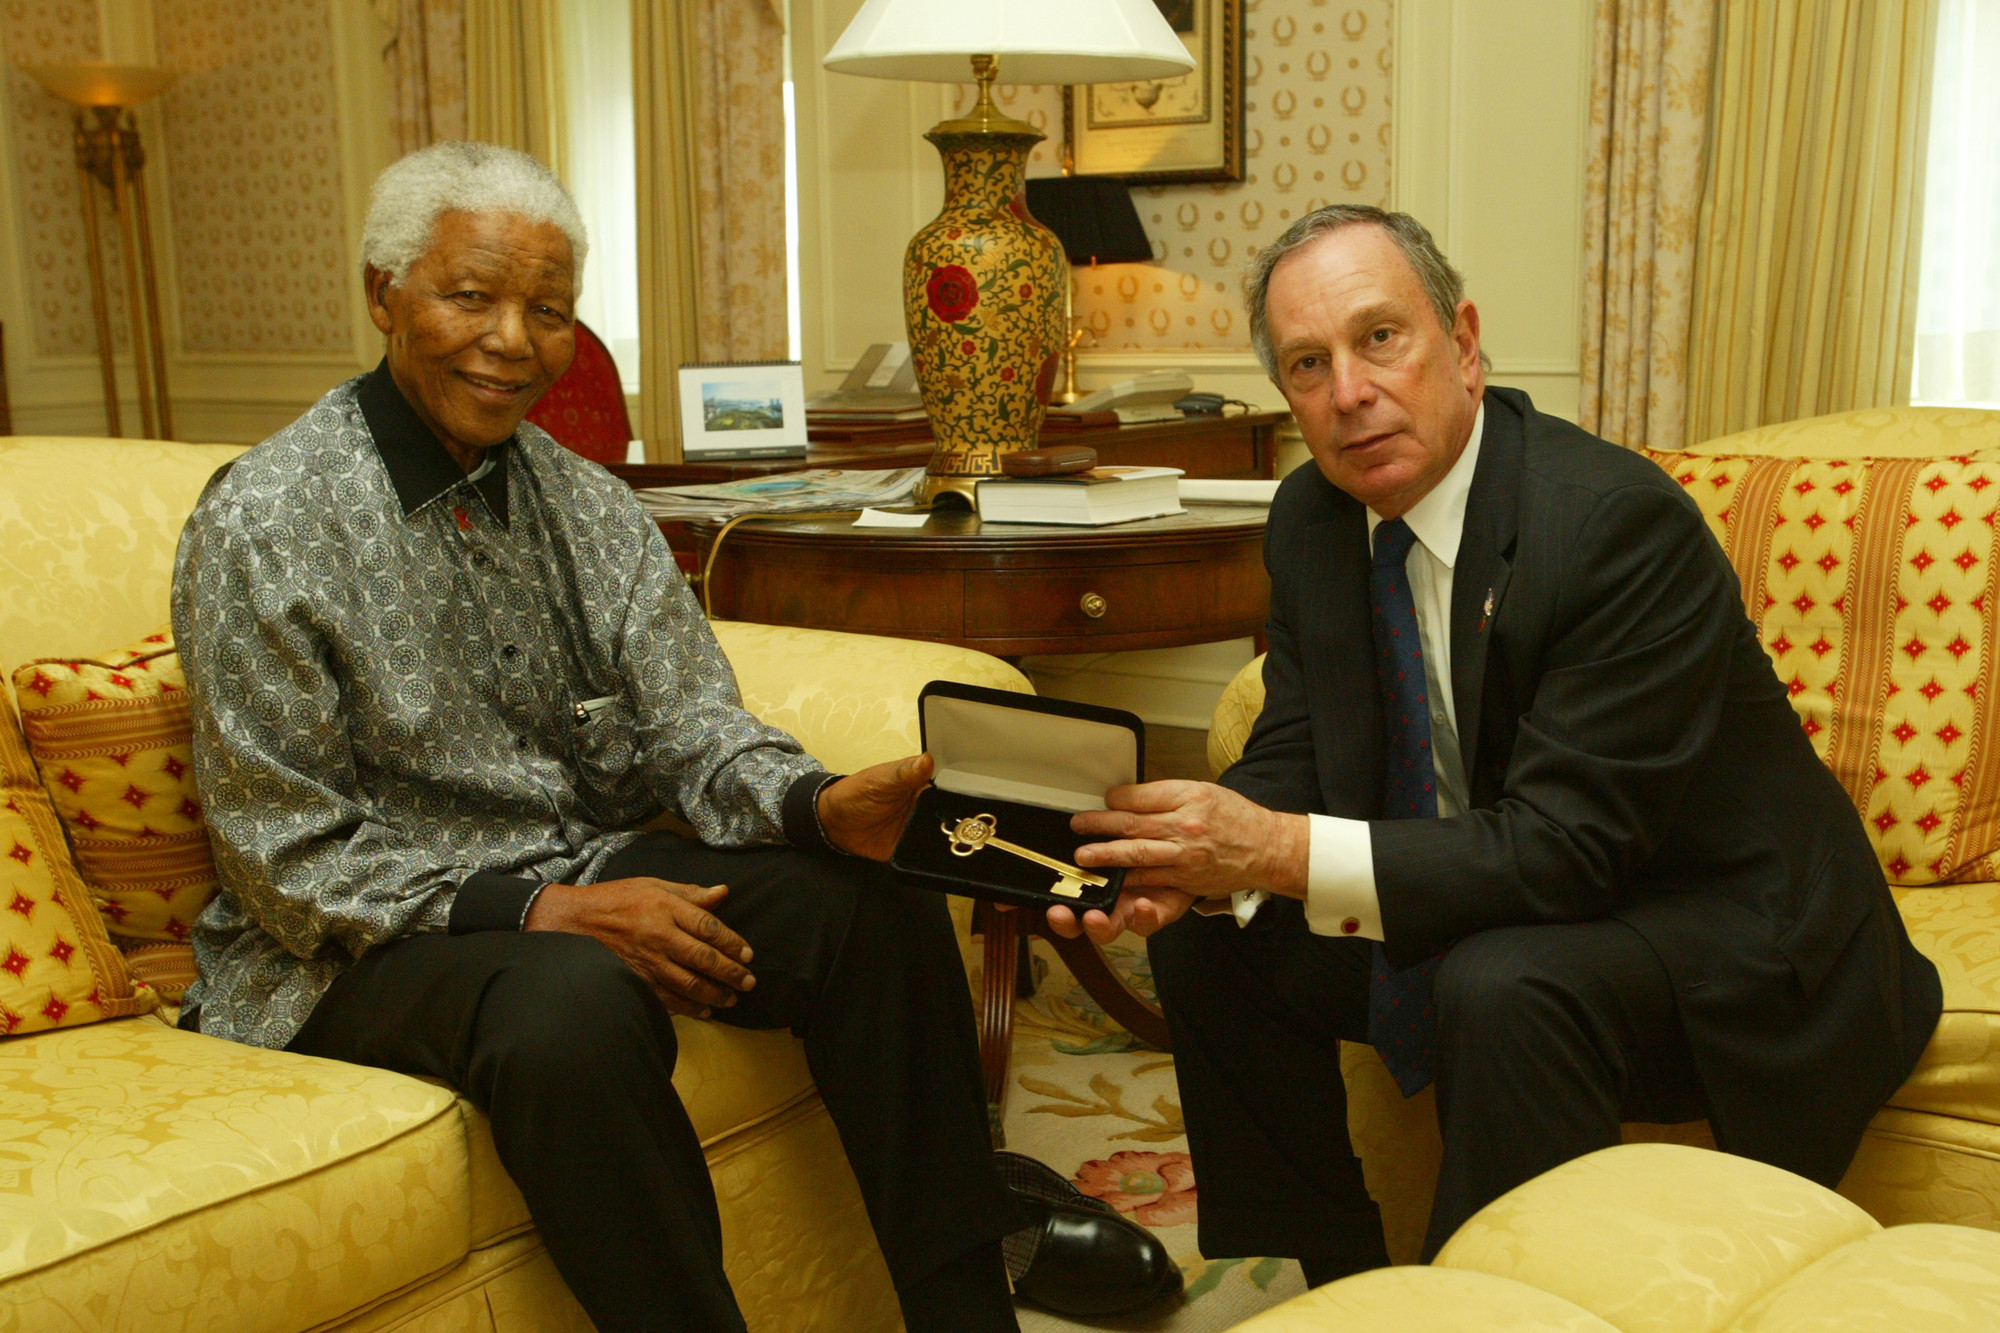 New York City Mayor Michael Bloomberg presented Mandela with a key to the city in 2005.